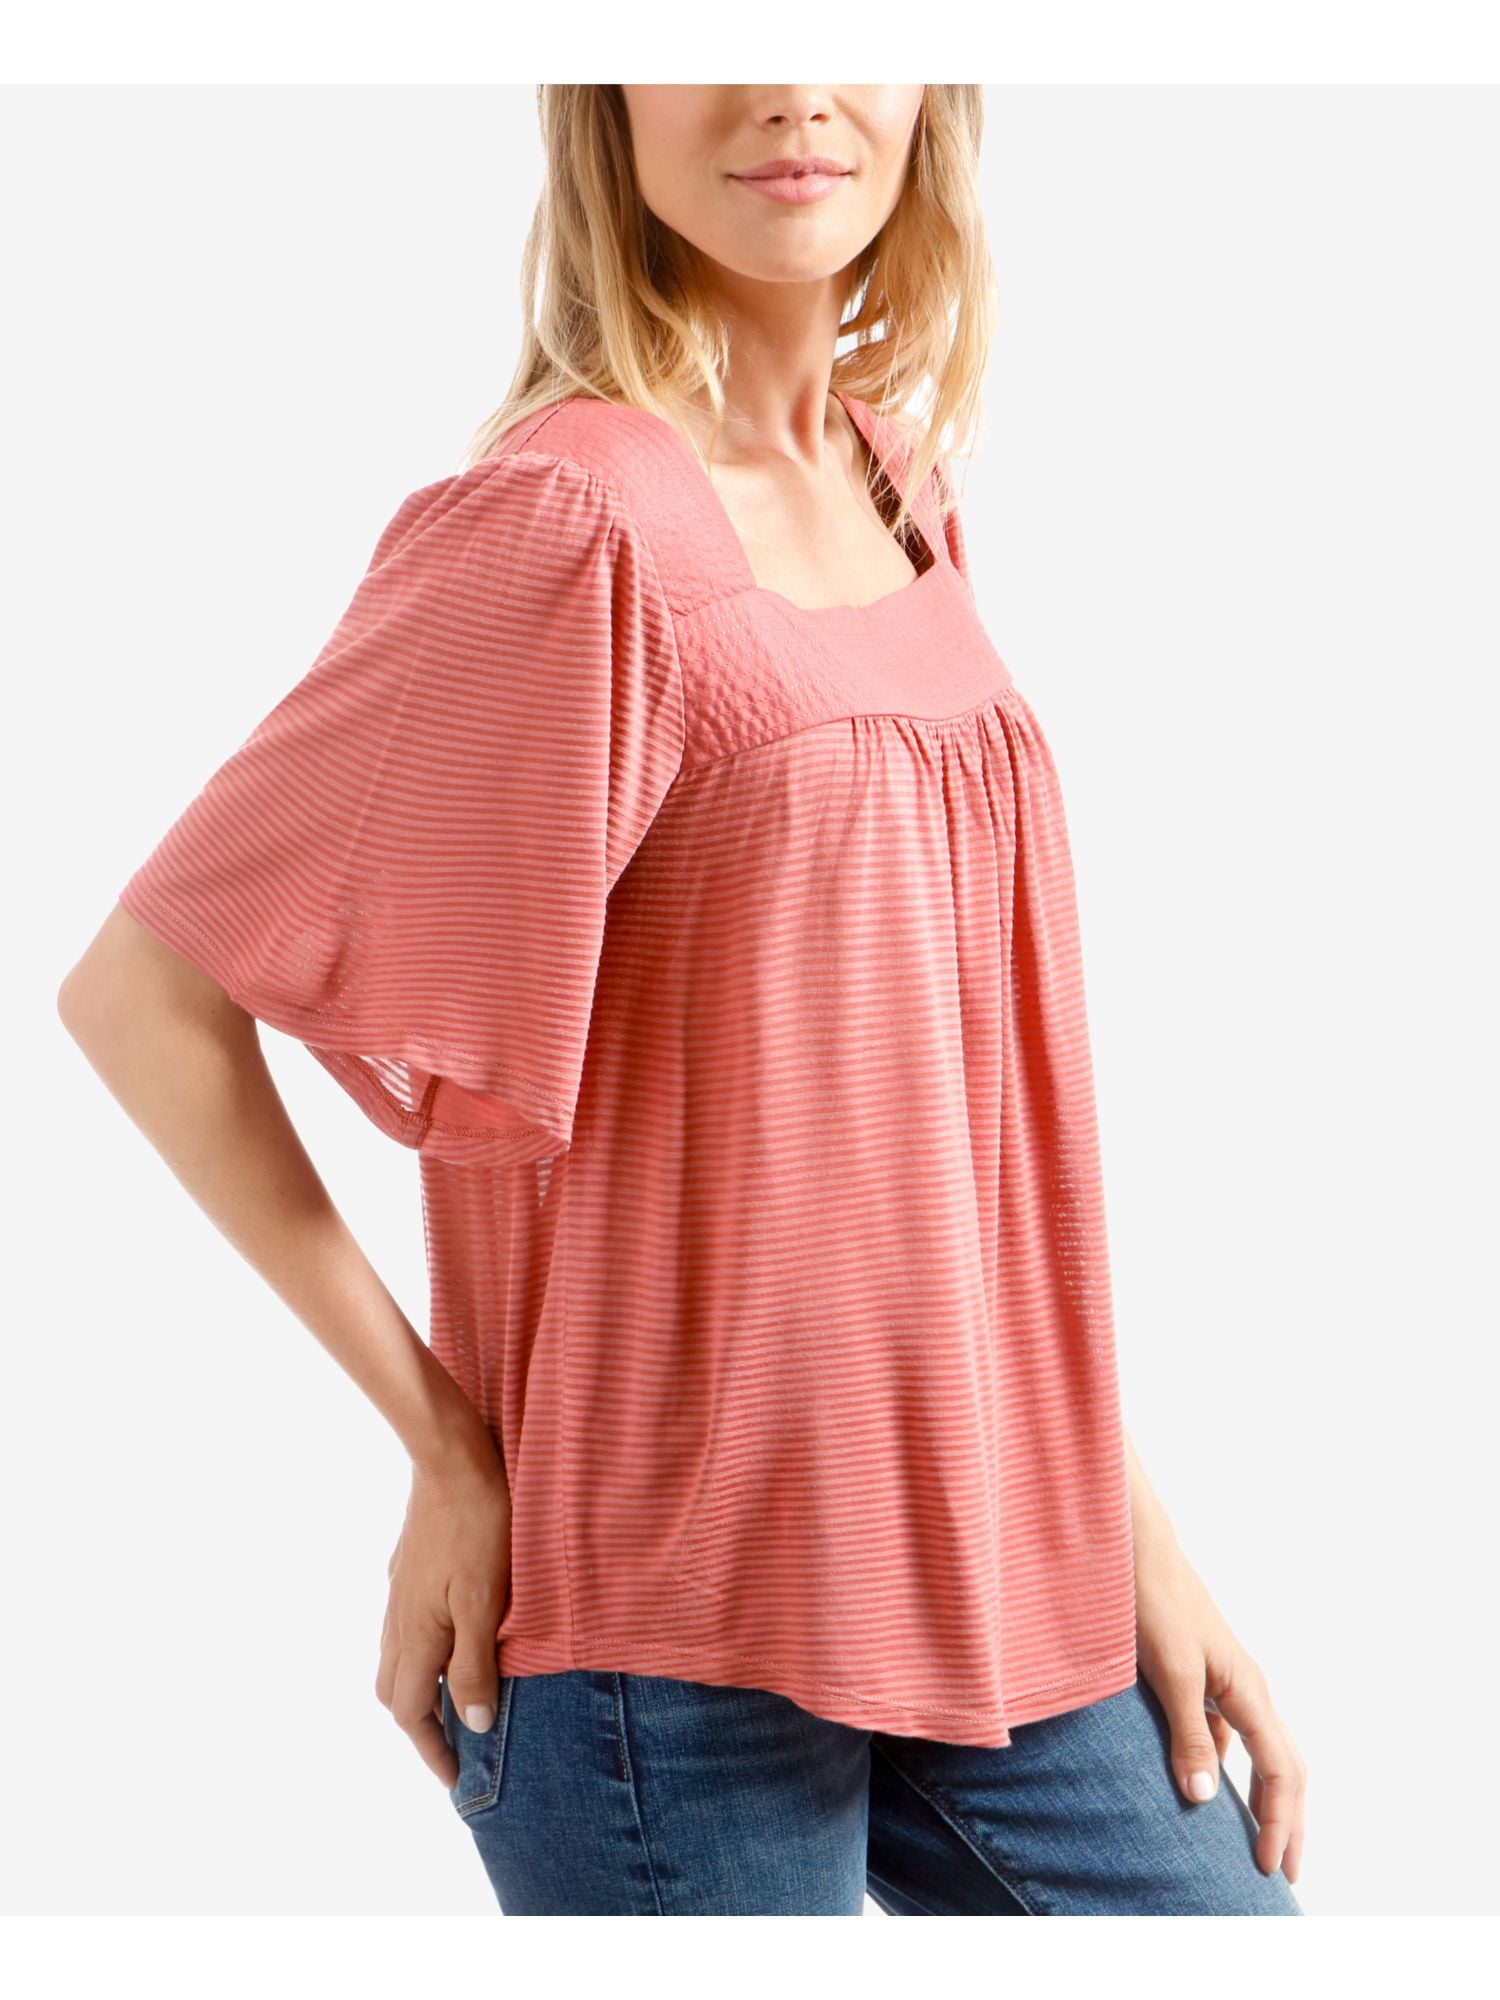 LUCKY BRAND $60 1655 Pink Shadow Stripe Square Neck Peasant Top S